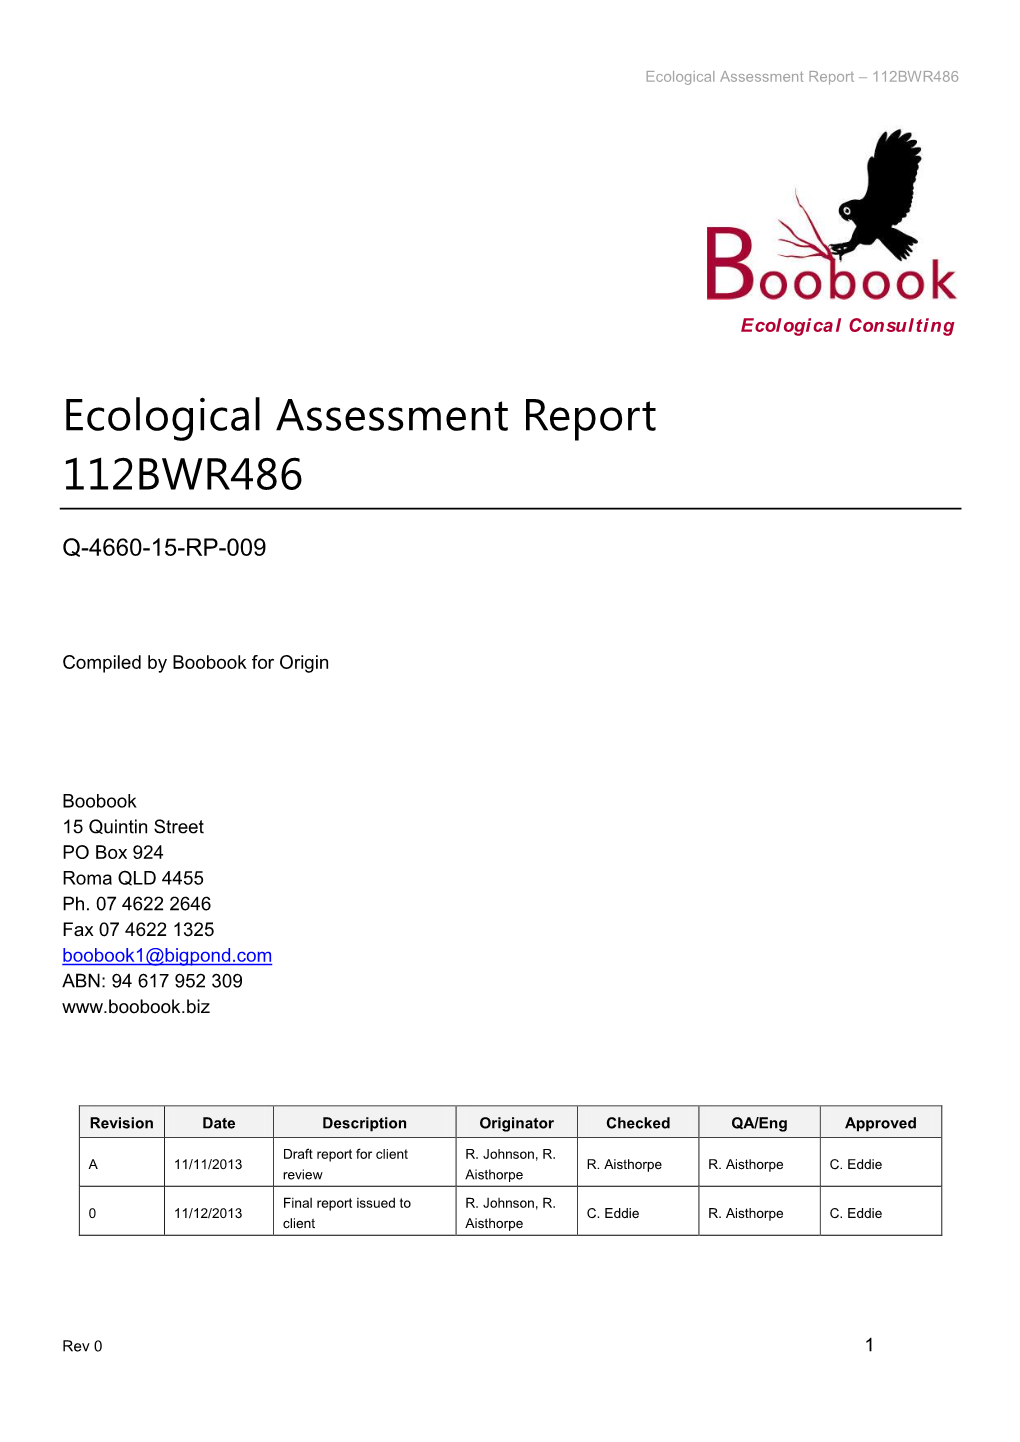 Ecological Assessment Report 112BWR486